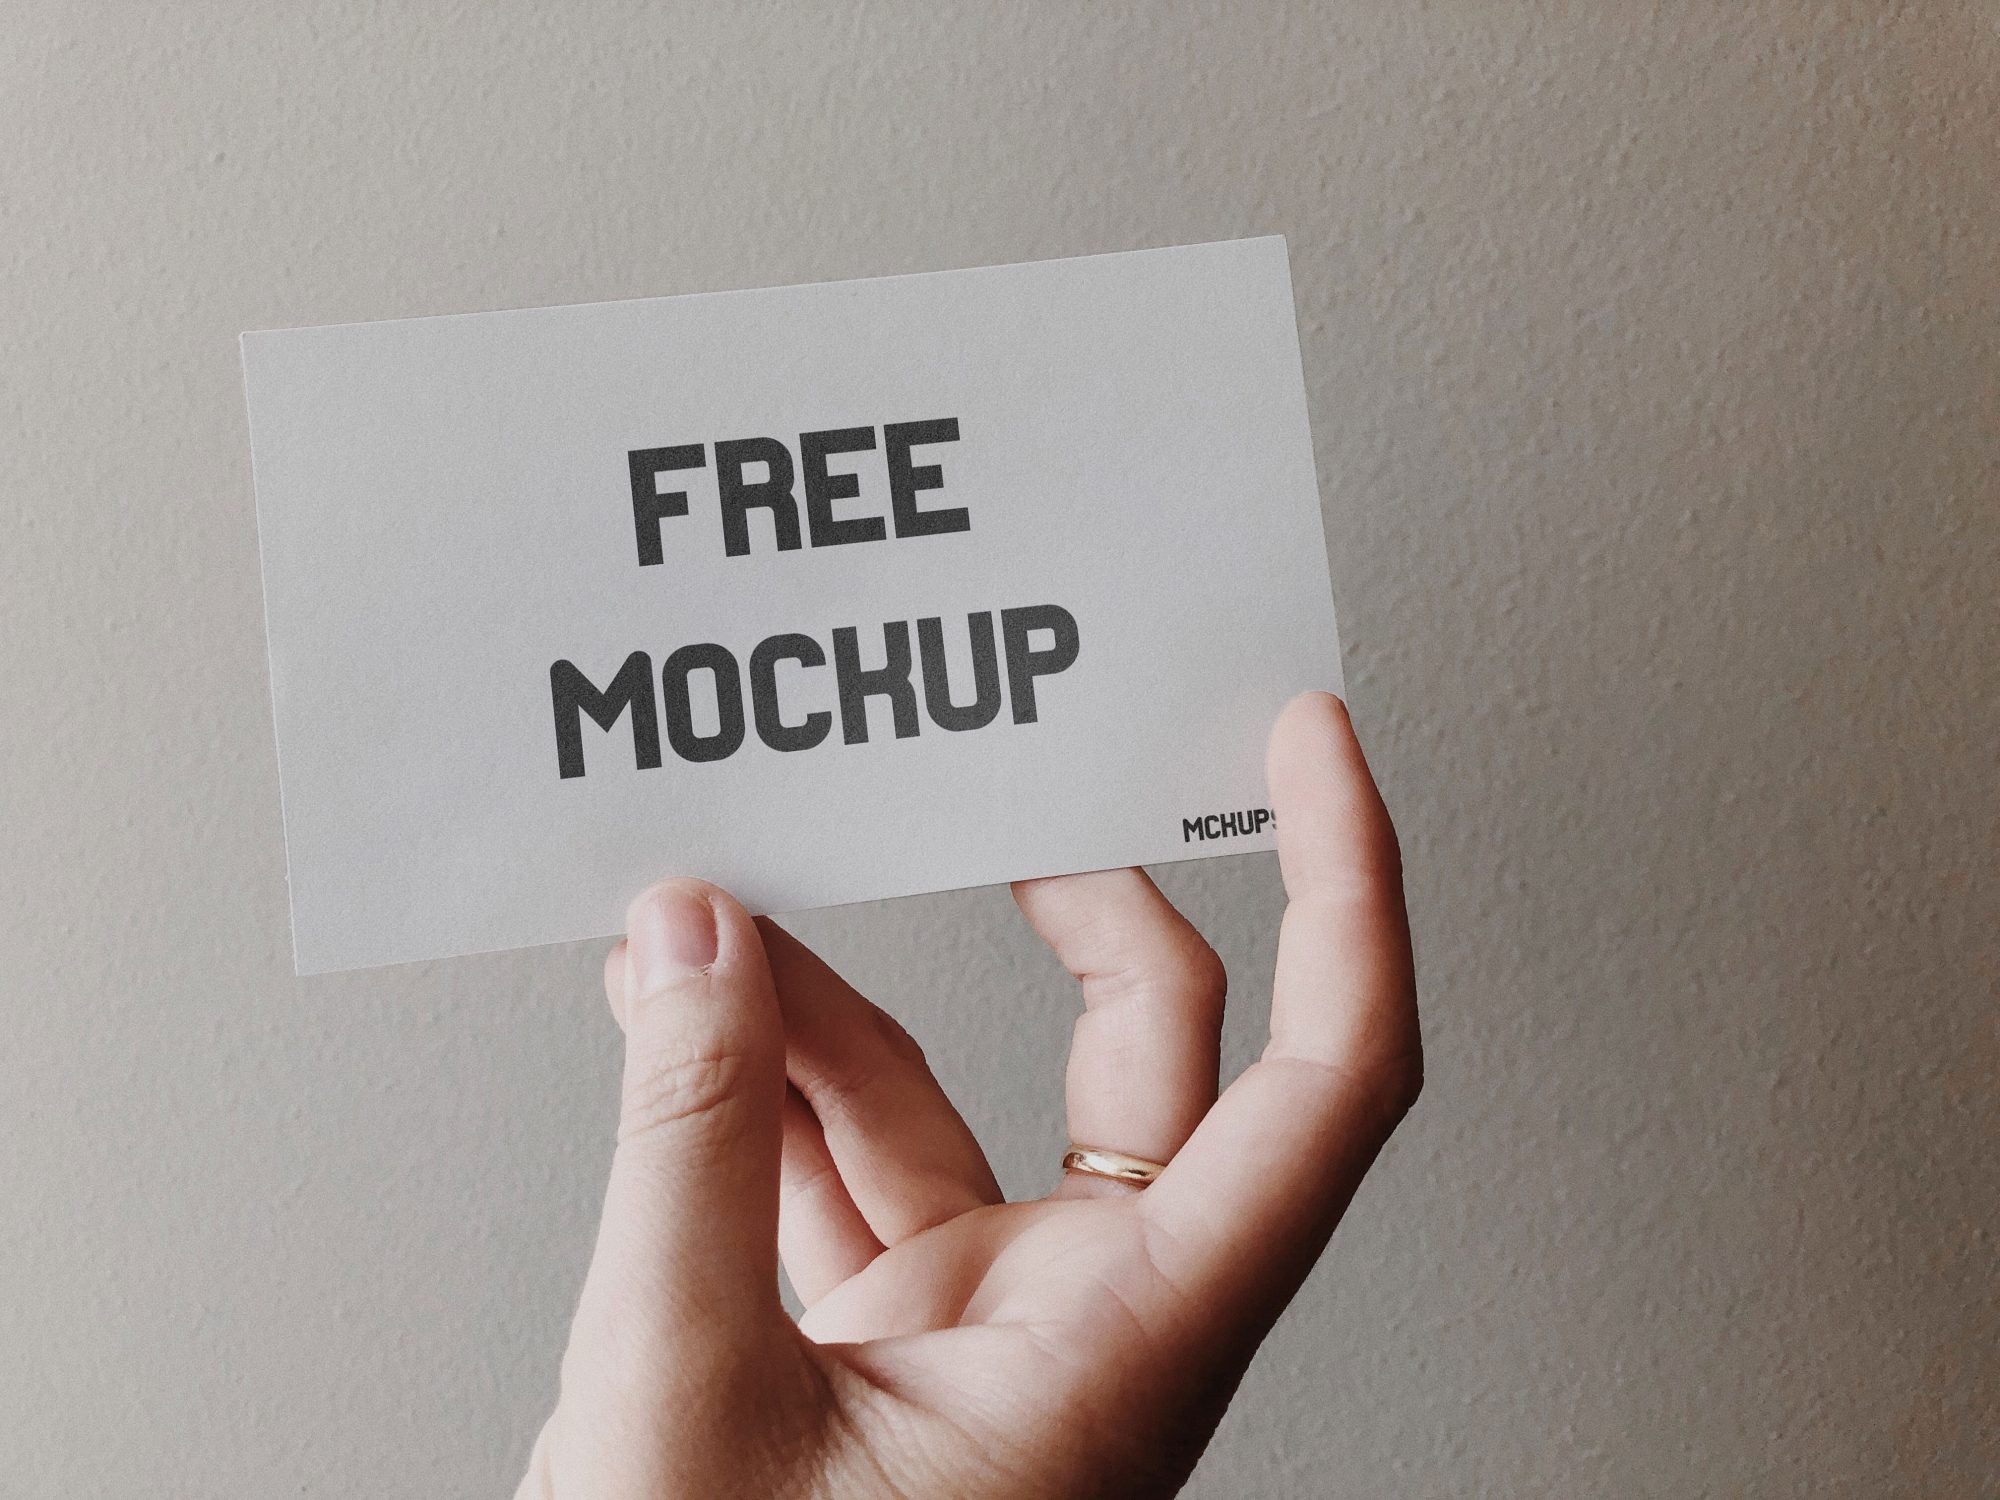 Download Free Business Card Mockup Free Mockup Download Yellowimages Mockups